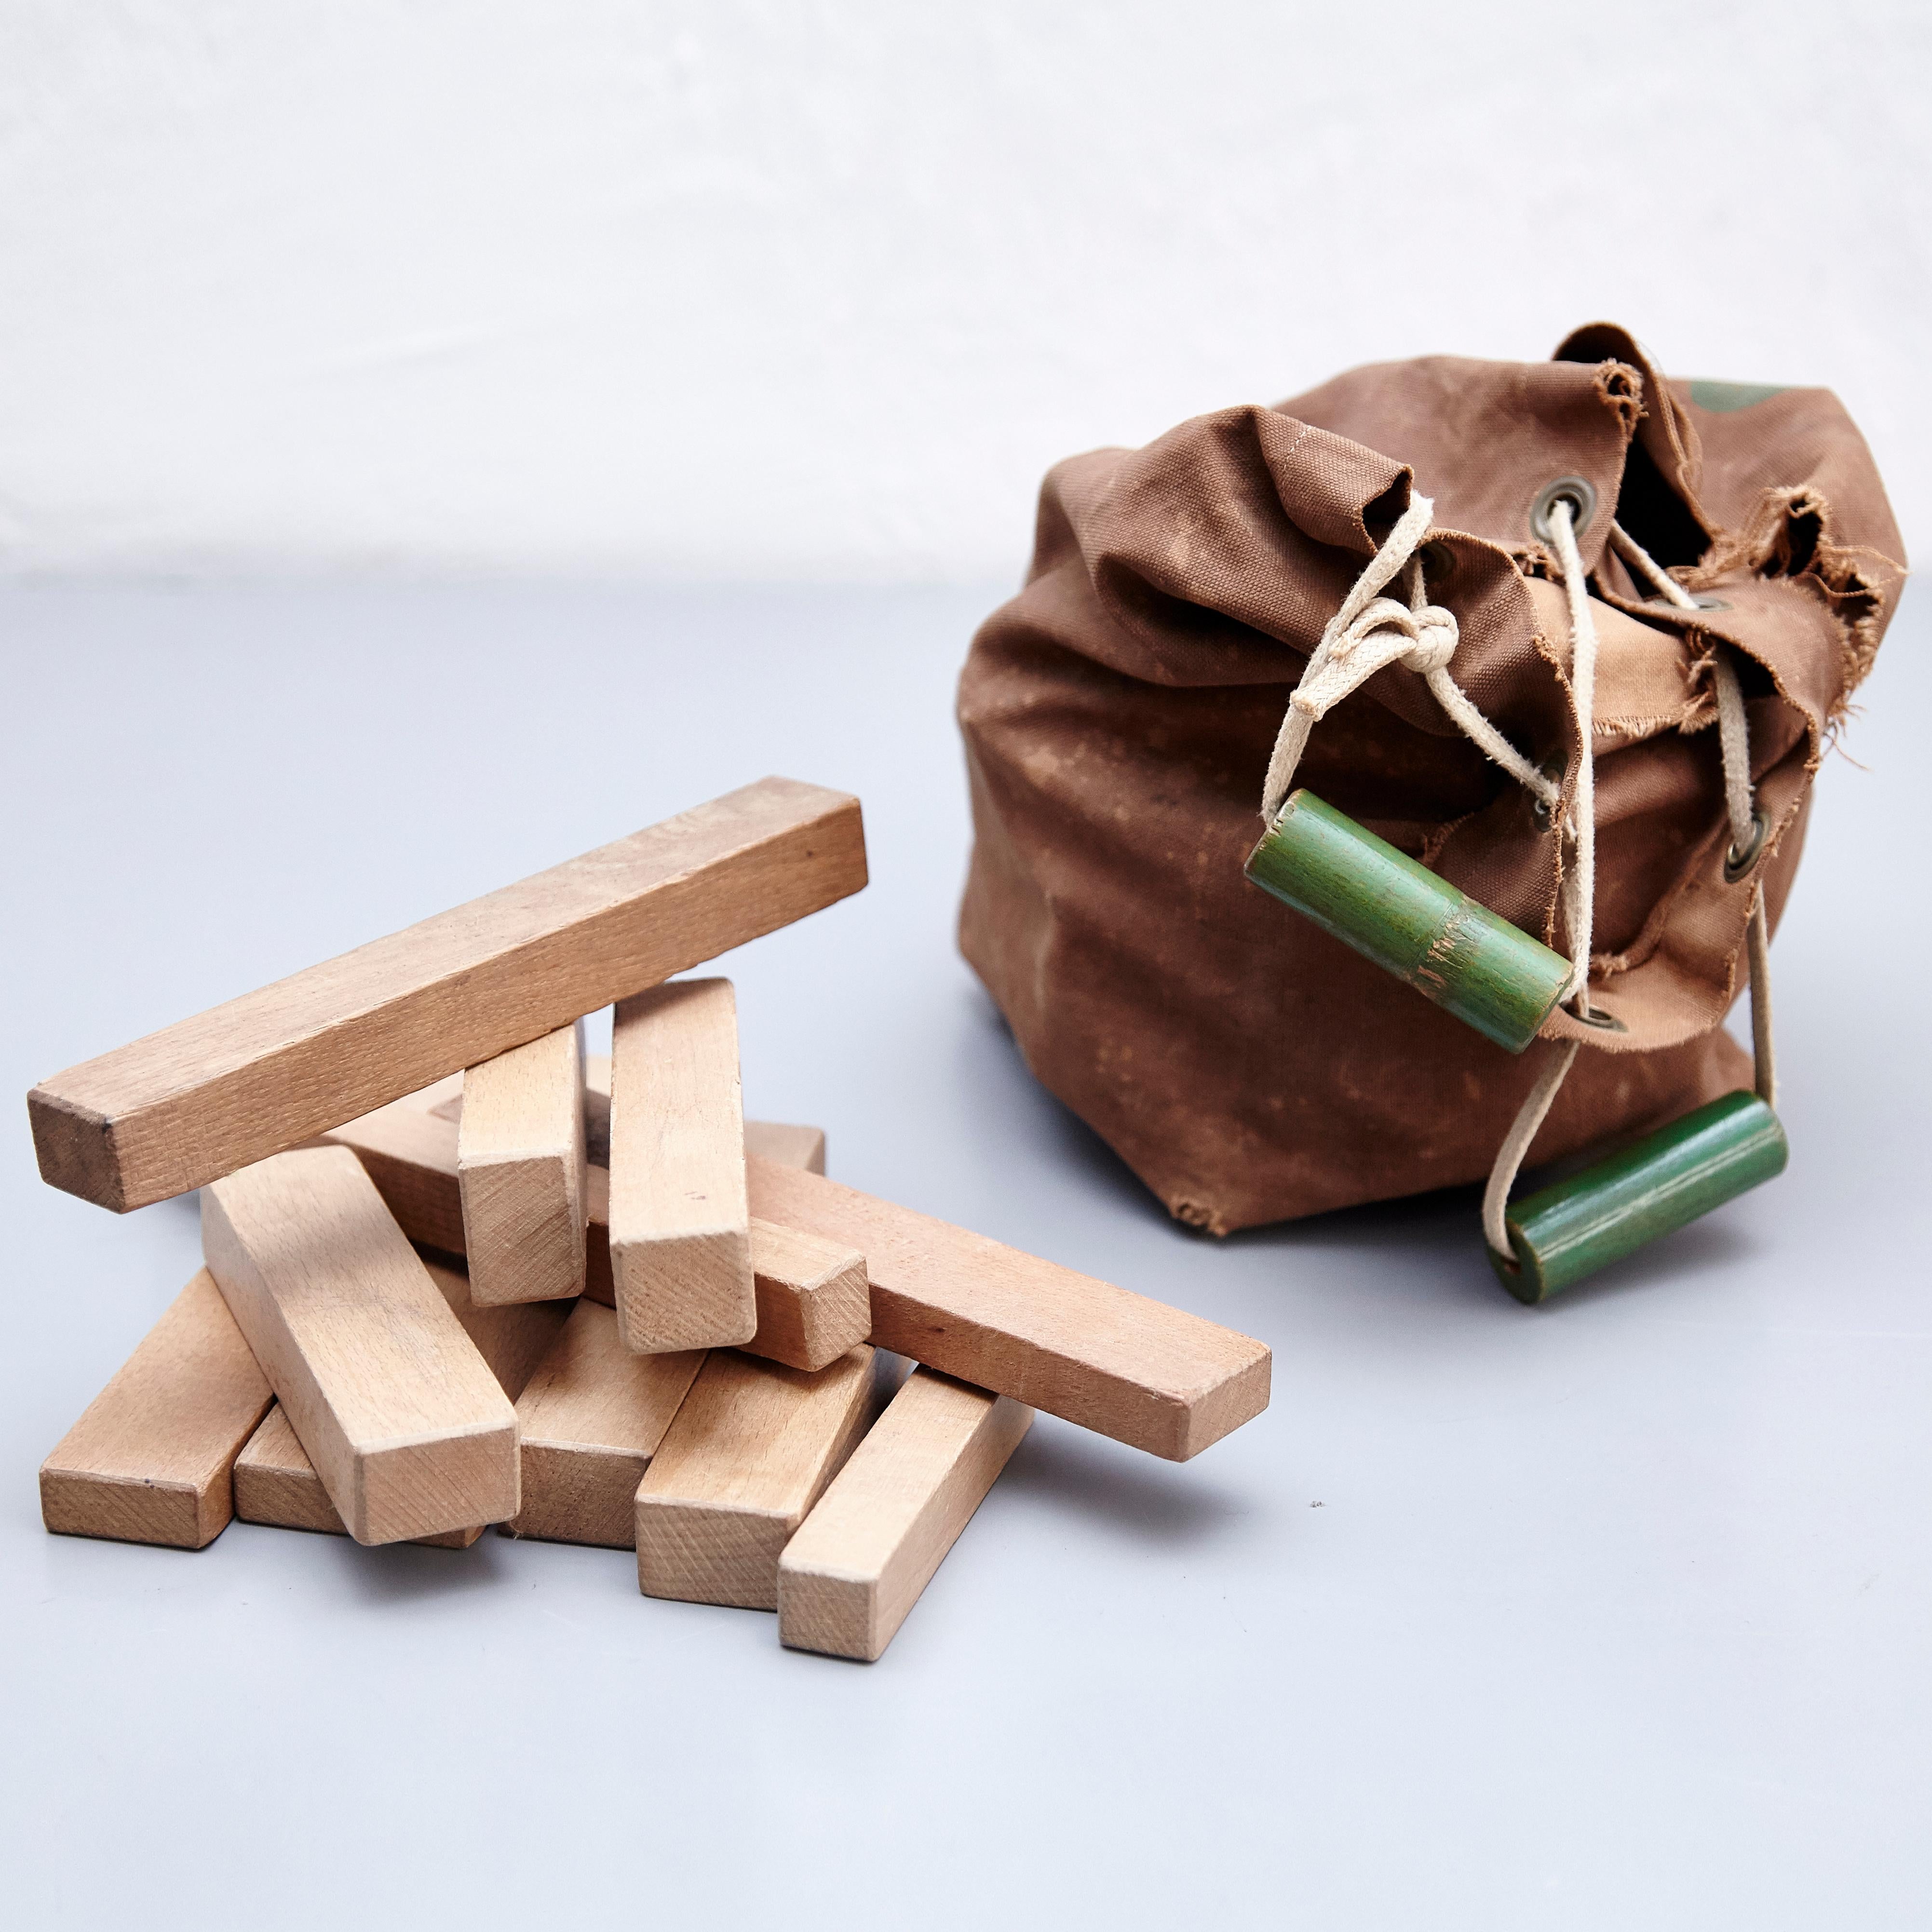 Toy designed by Ko Verzuu, circa 1950.
Manufactured by ADO in Netherlands.

ADO Blokken, canvas bag with a set of wooden blocks / cubes to play.

In good original condition, with minor wear consistent with age and use, preserving a beautiful